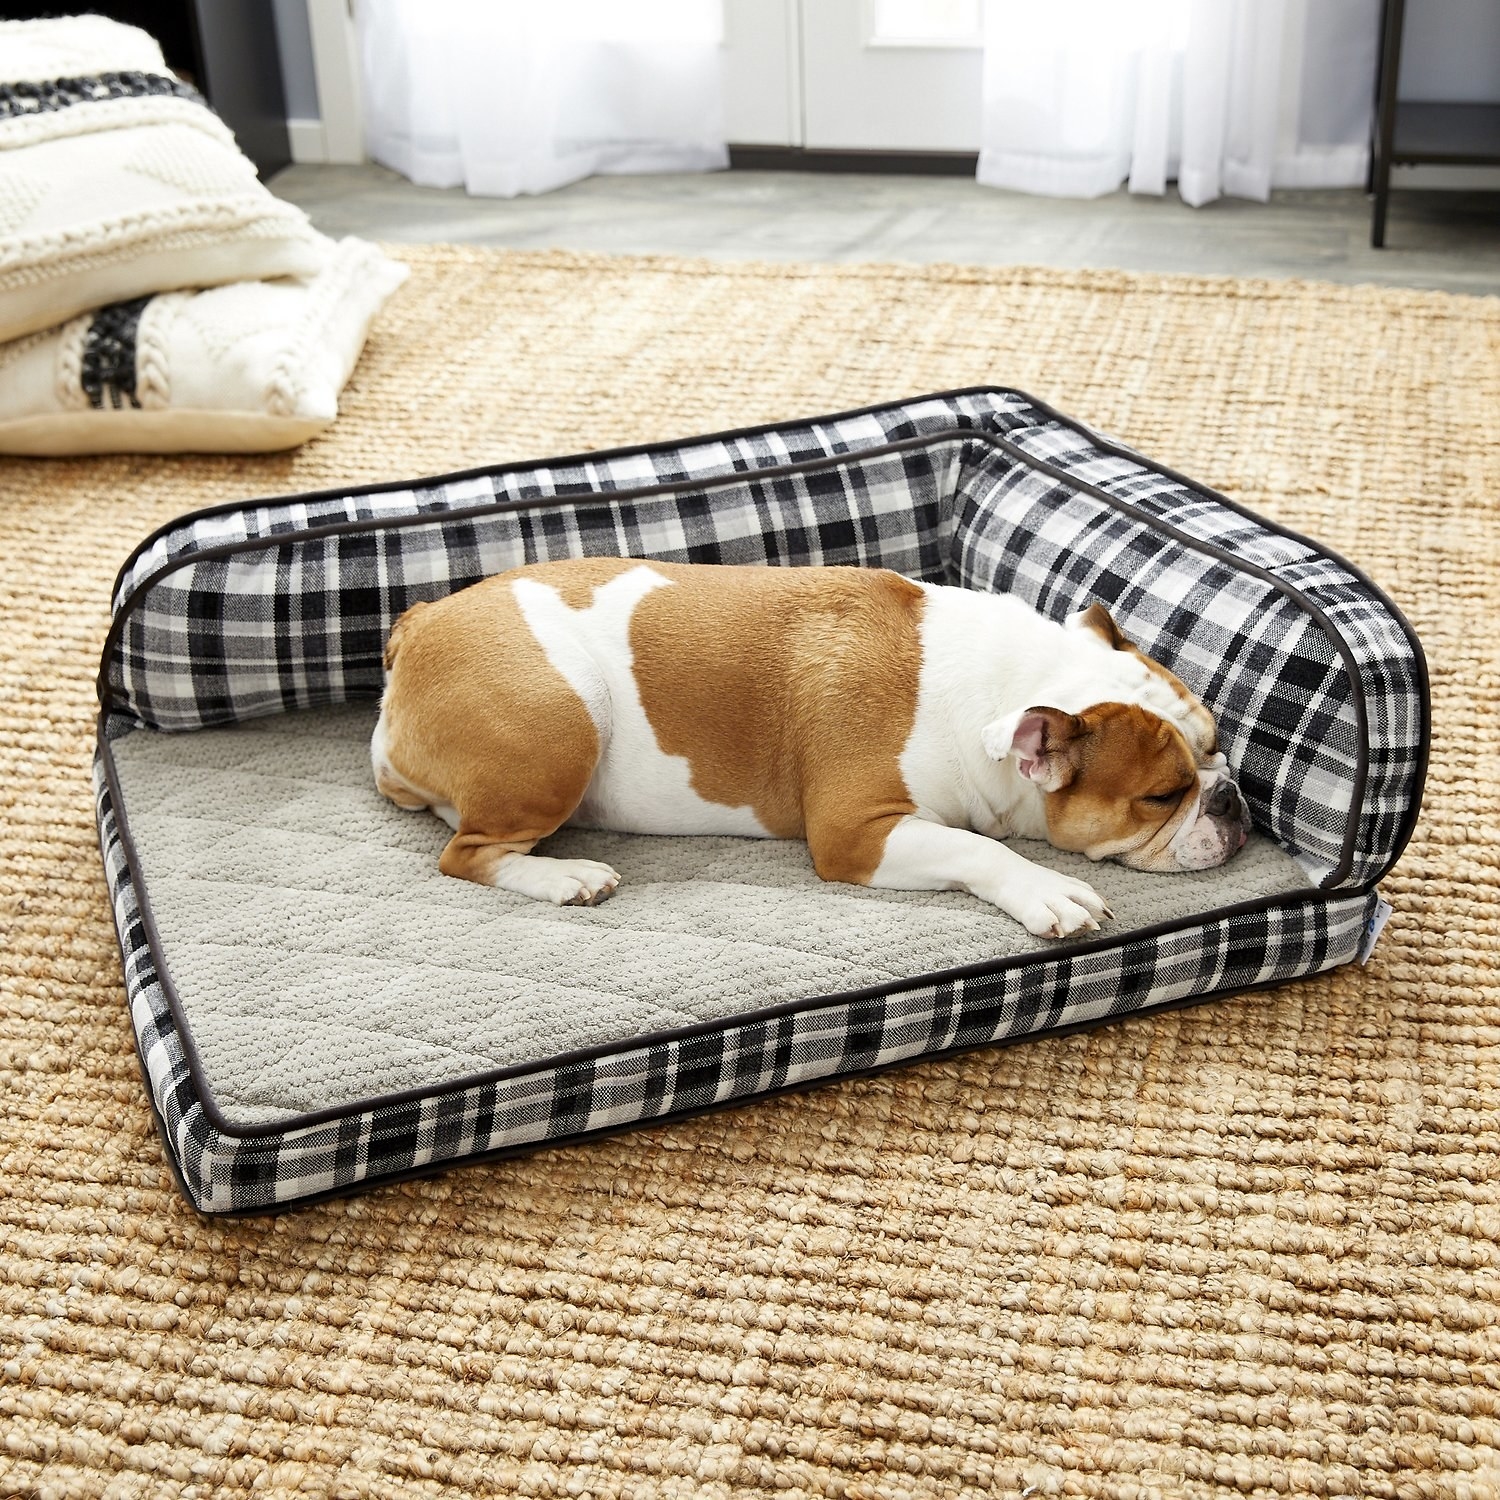 Bulldog laying on the gray dog bed, which has an L-shaped bolster